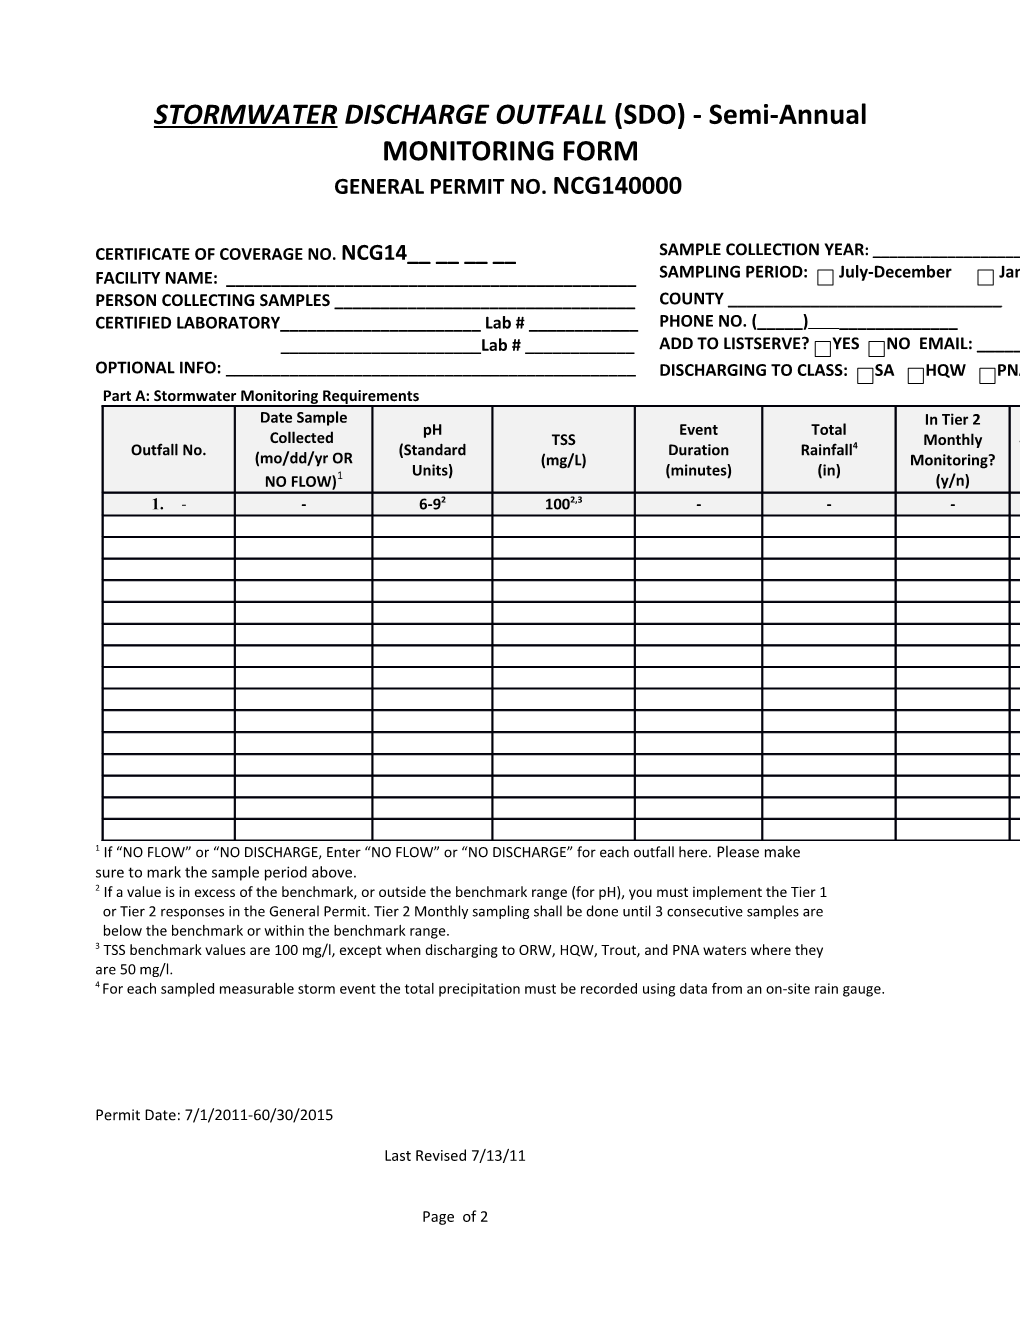 STORMWATERDISCHARGE OUTFALL (SDO)- Semi-Annual MONITORING FORM